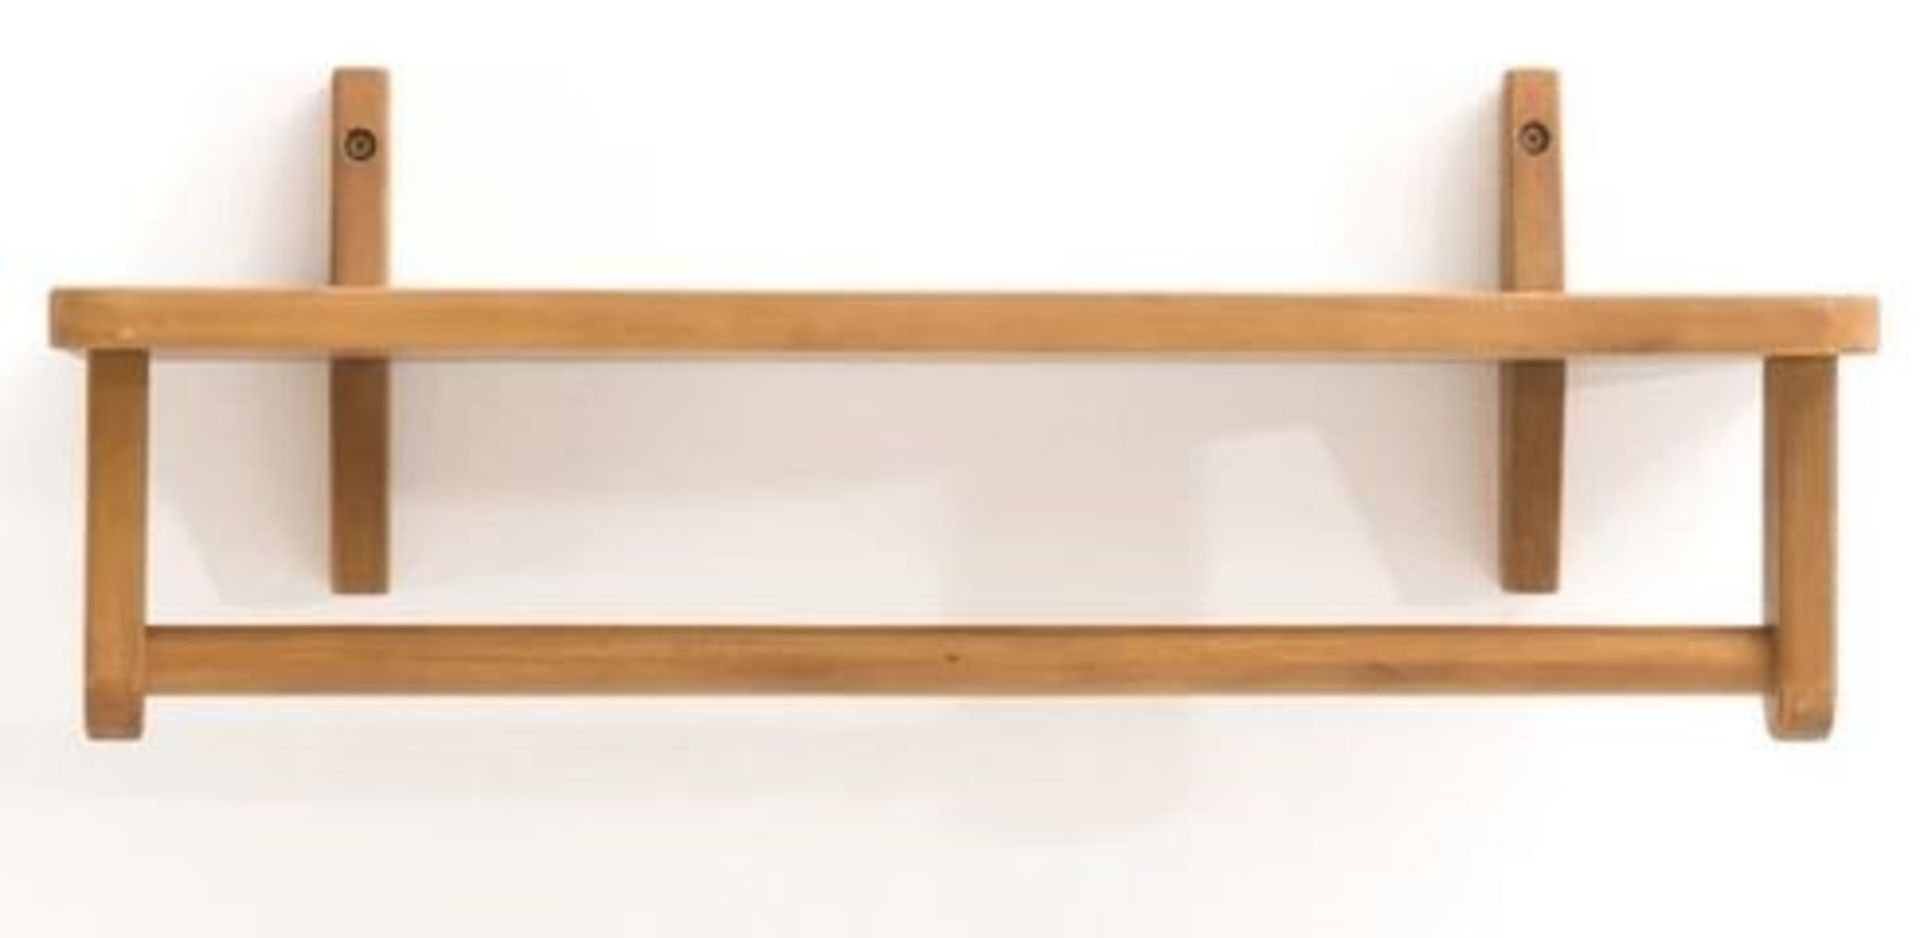 1 GRADE B BOXED LA REDOUTE ACACIA WOOD WALL SHELF / RRP £18.00 (PUBLIC VIEWING AVAILABLE)